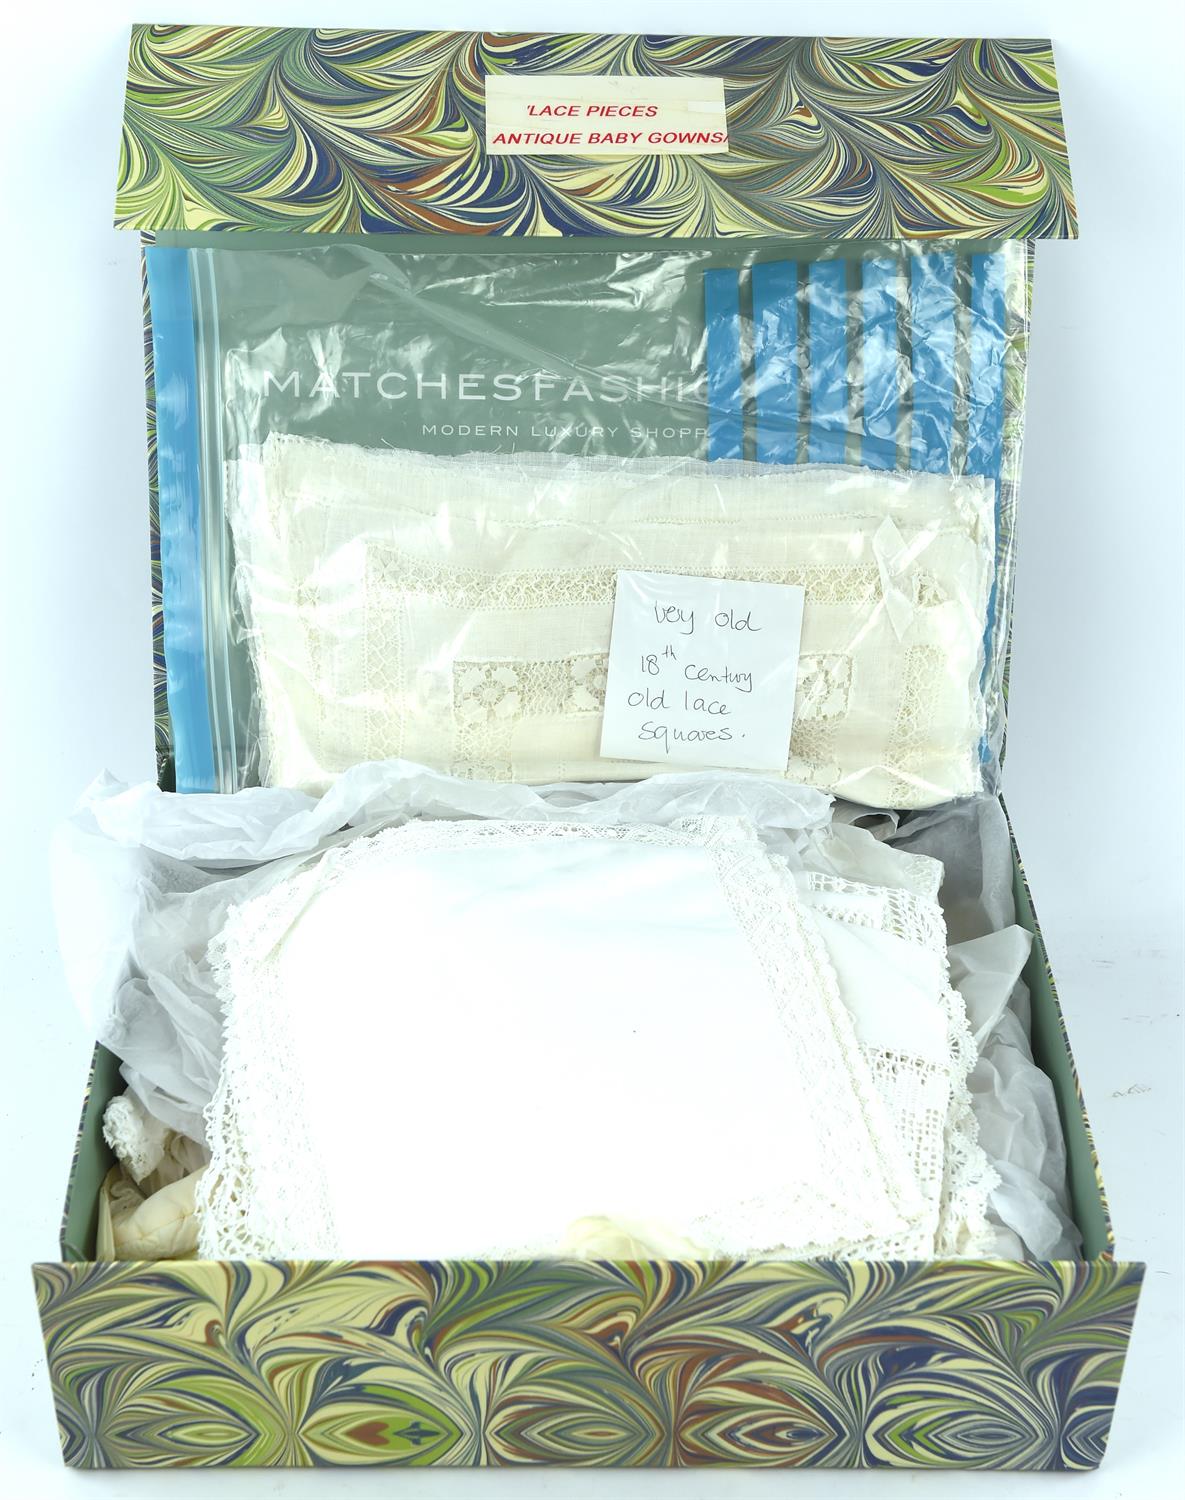 Collection of lace, linen and christening gowns